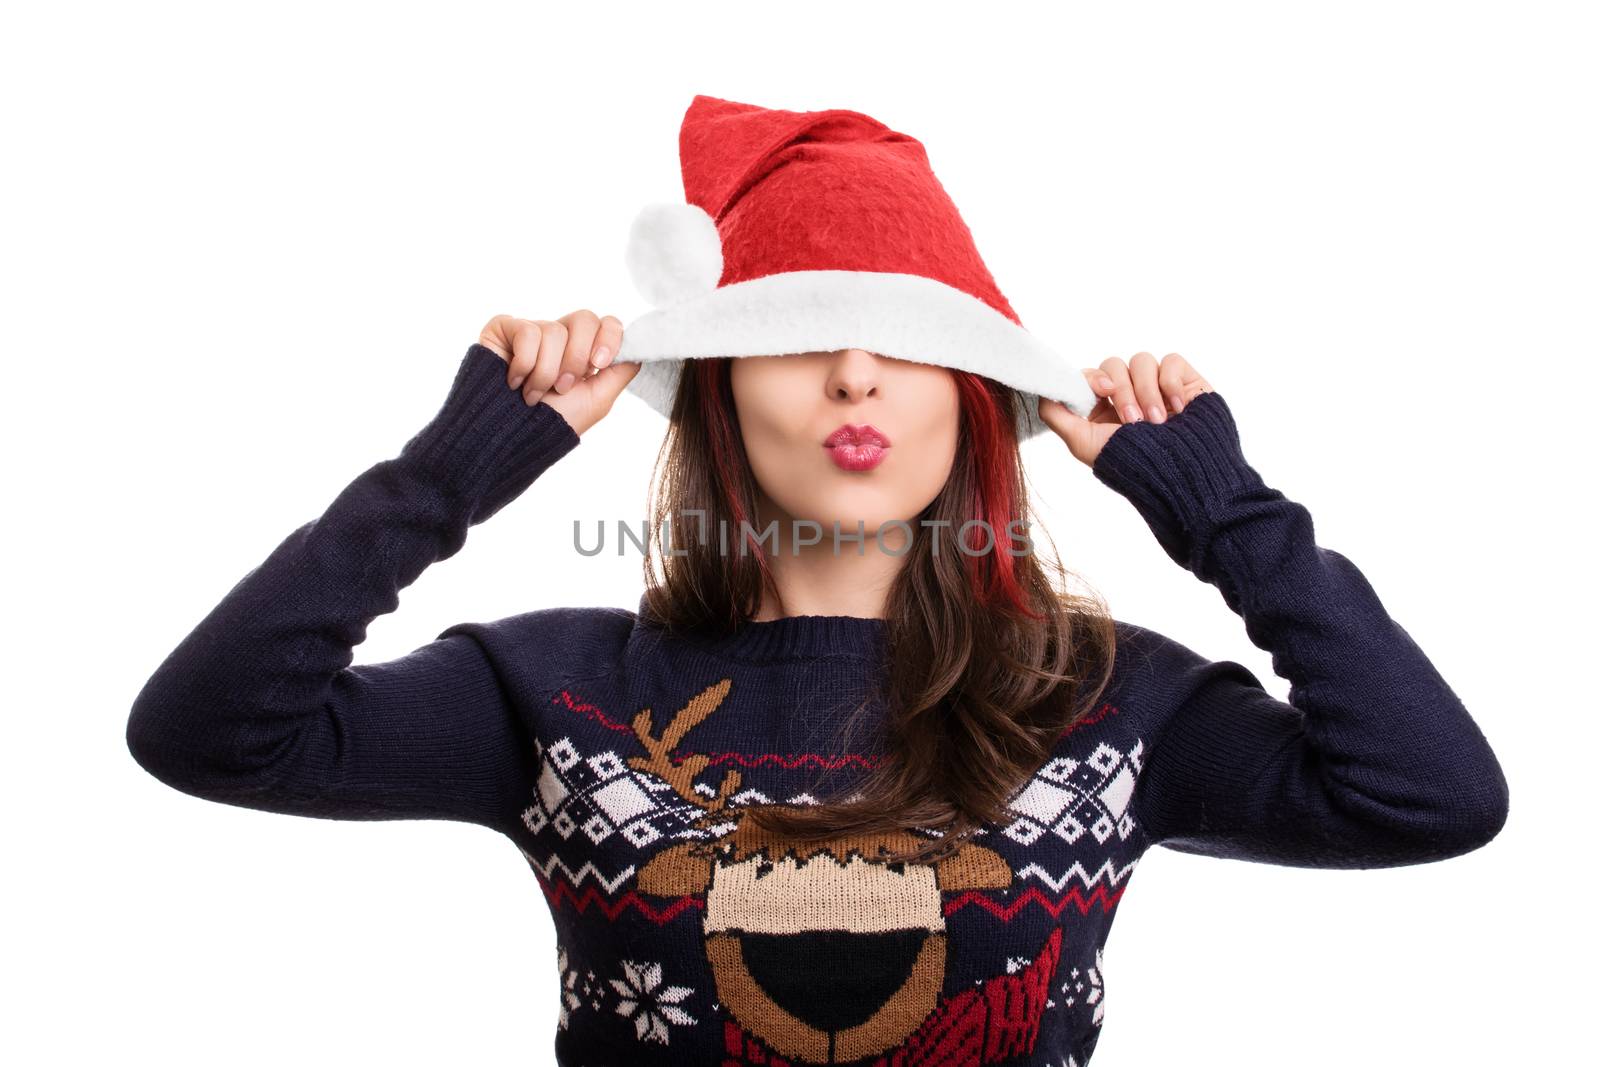 Kisses for the Christmas holidays. Festive beautiful young woman with Santa's hat pulled over her eyes, isolated on white background.